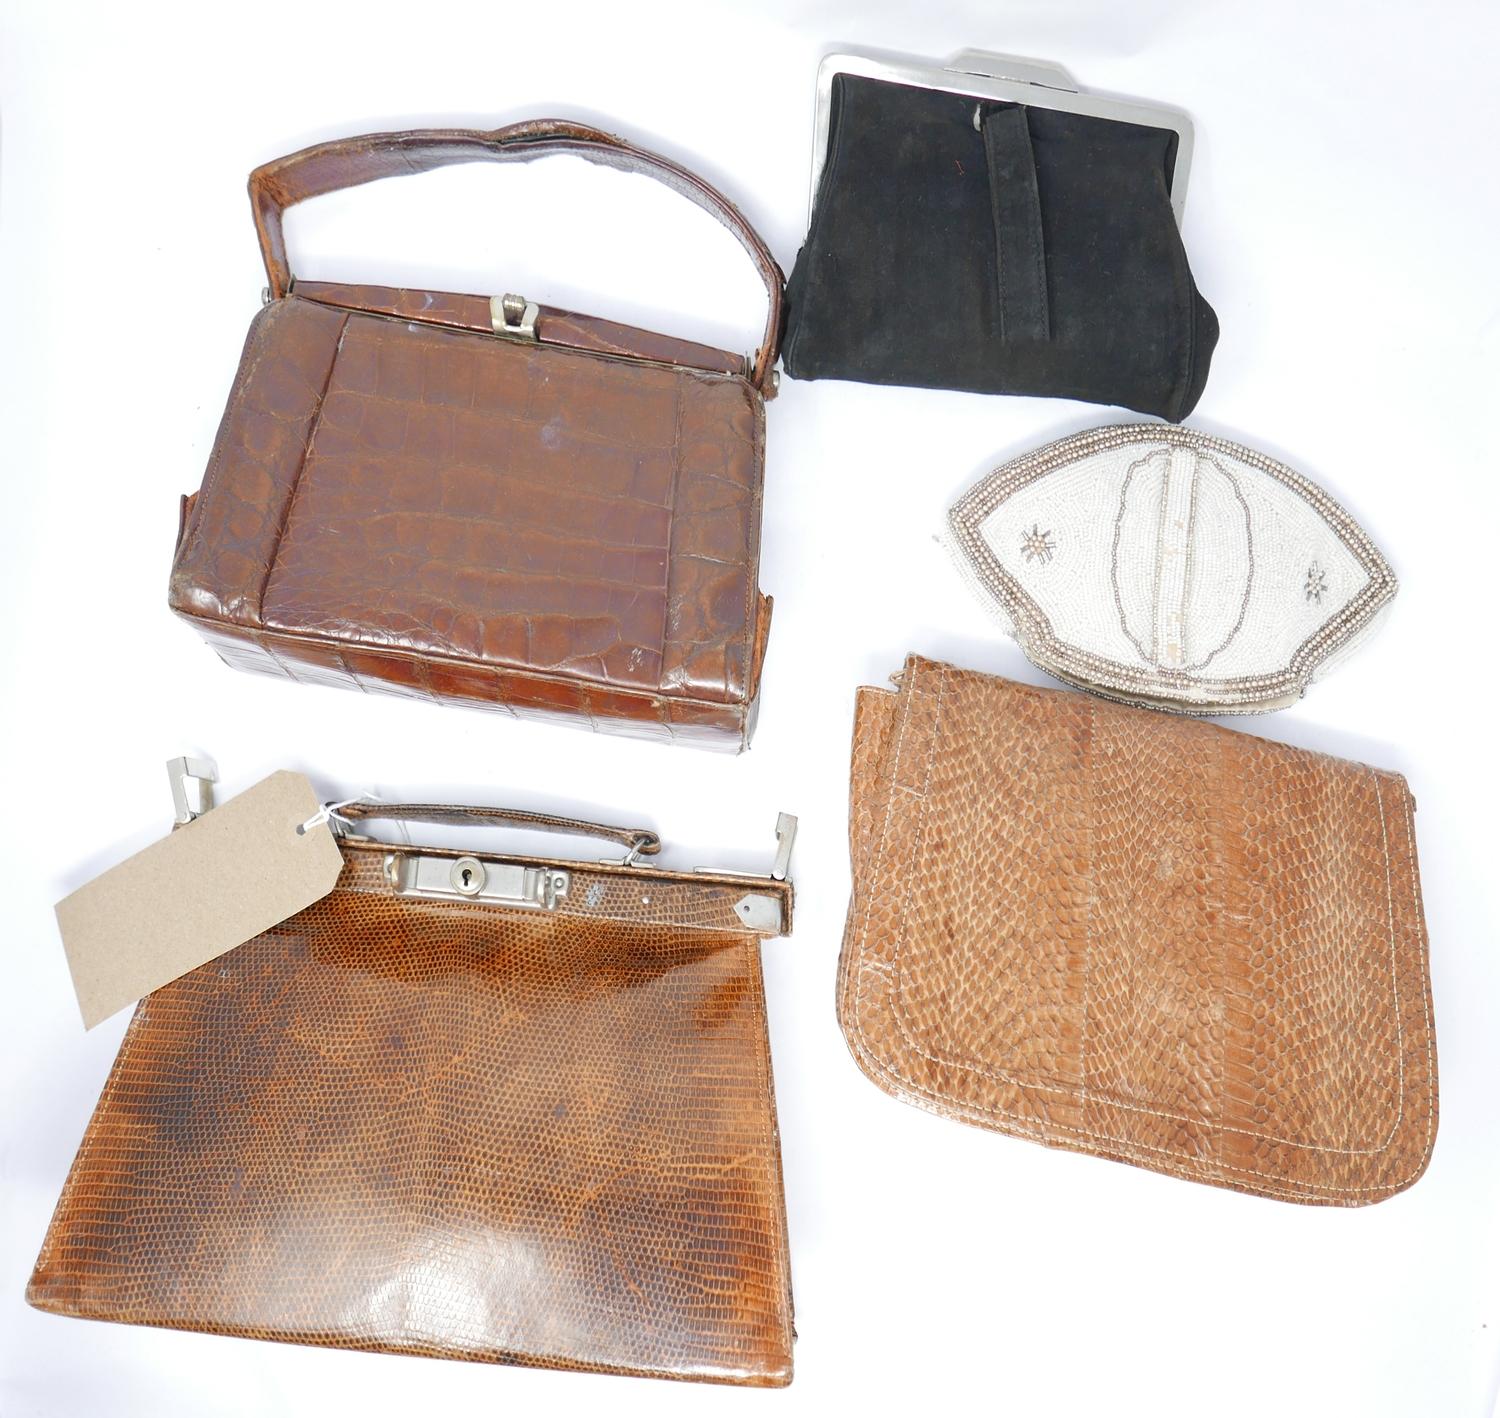 A collection of handbags and clutches, to include a snakeskin handbag, snakeskin clutch, and two